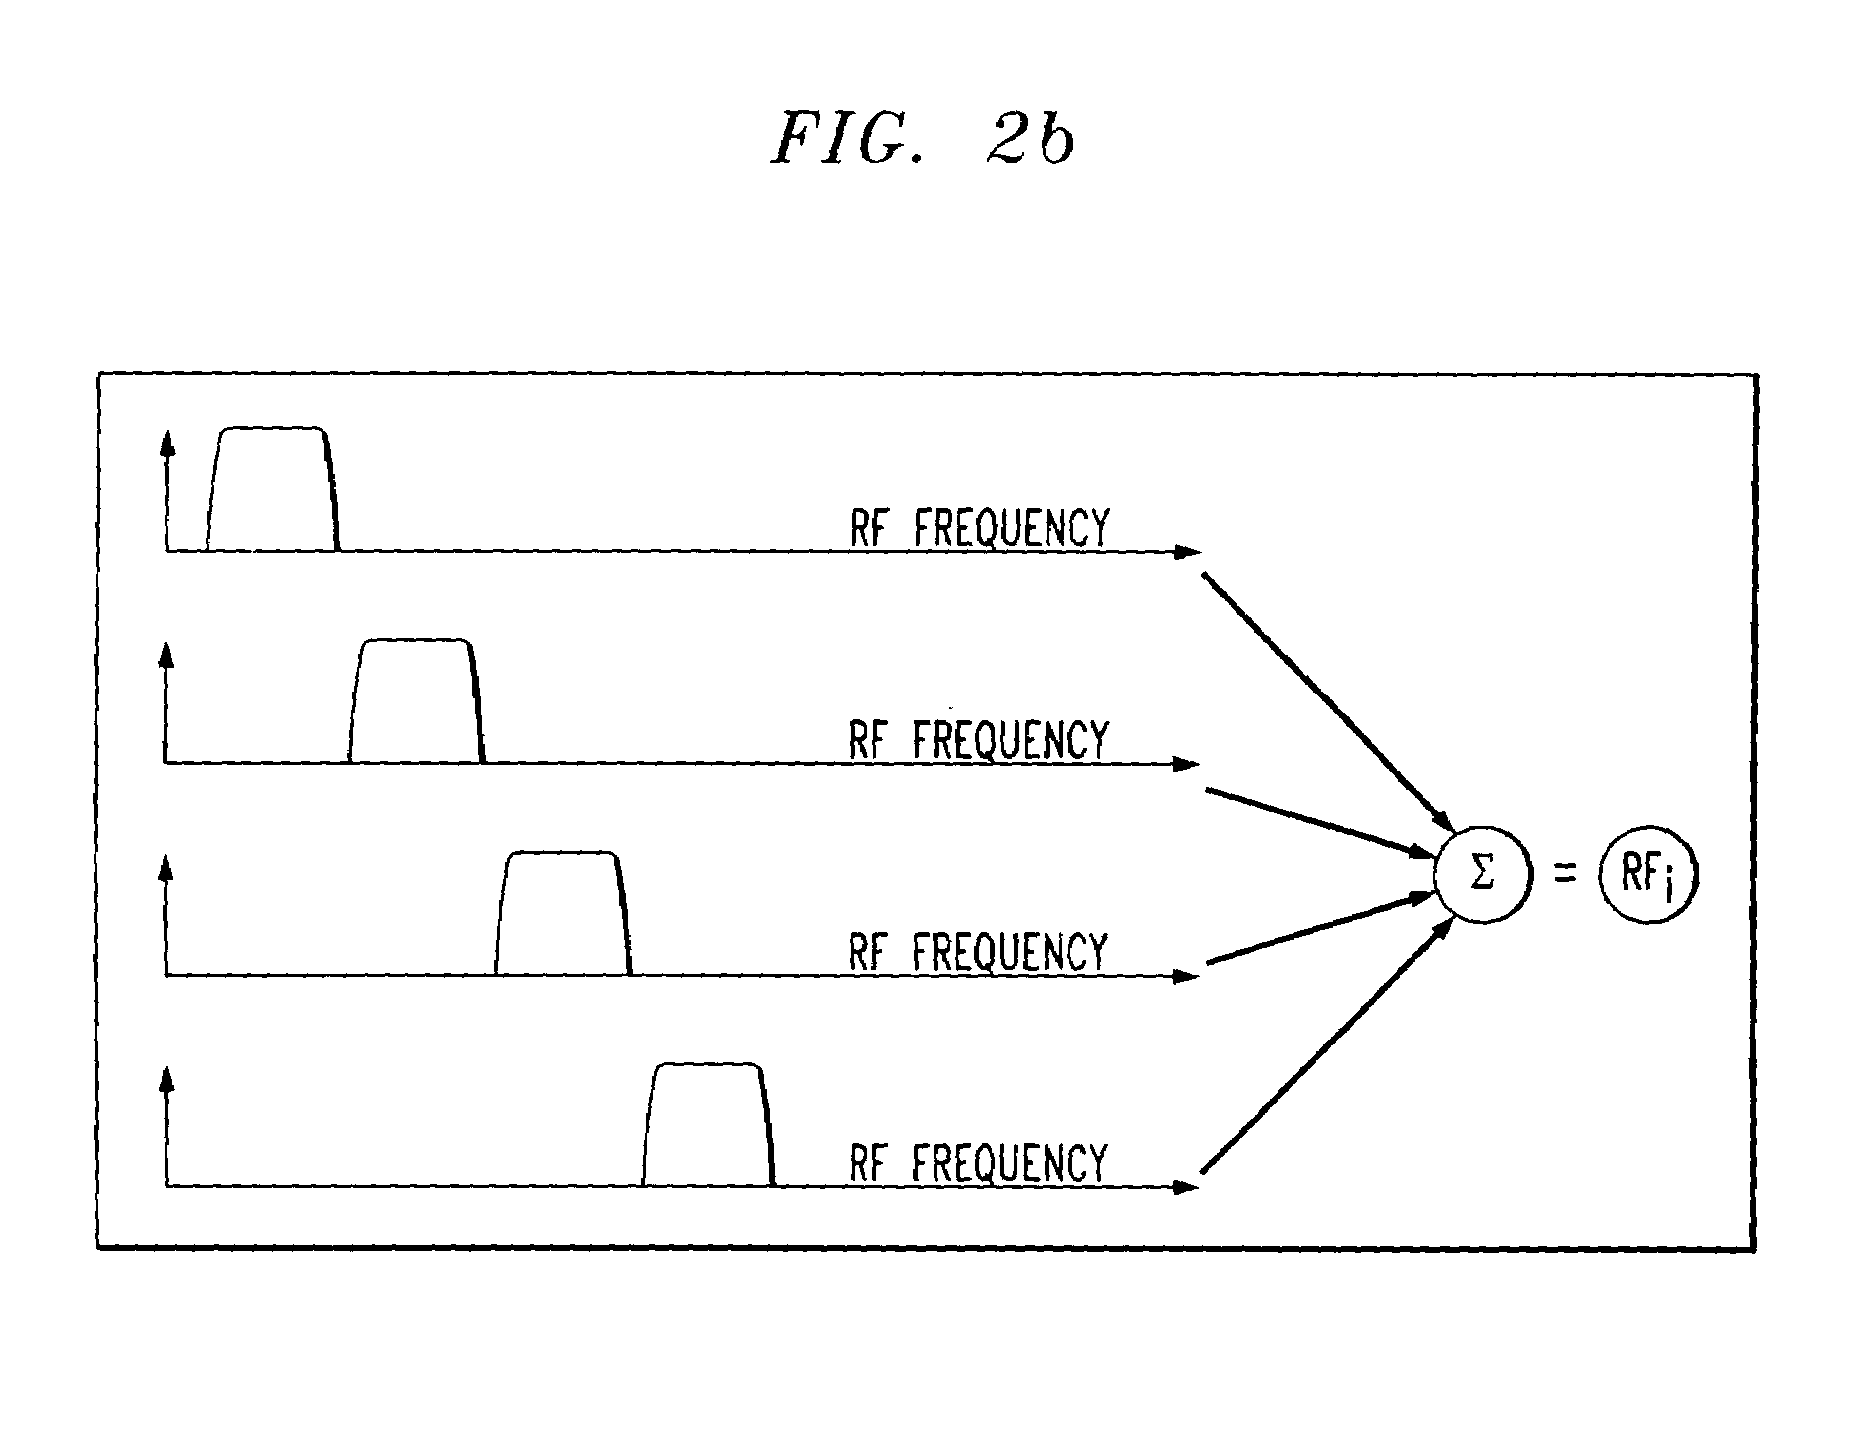 Method of flexible multiple broadcast service delivery over a WDM passive optical network based on RF Block-conversion of RF service bands within wavelength bands